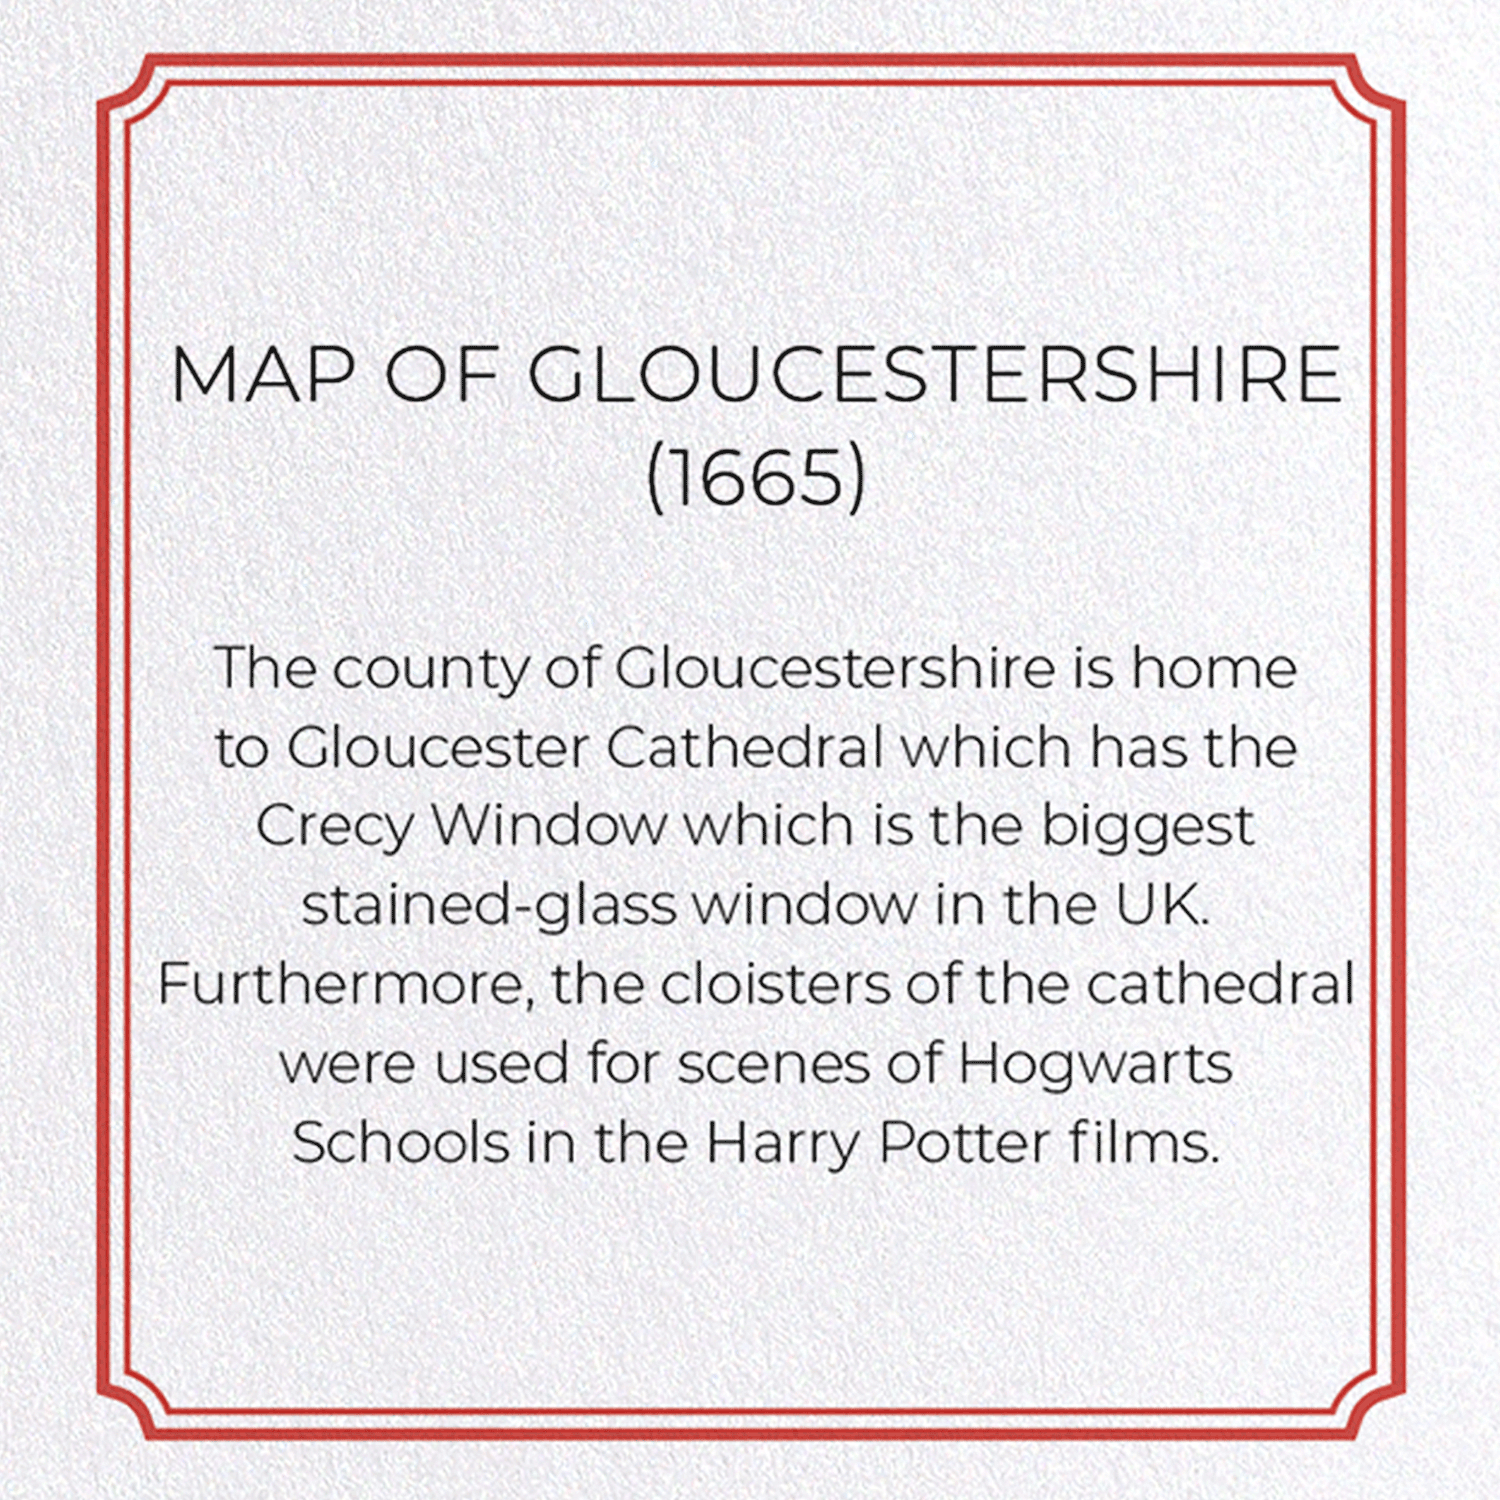 MAP OF GLOUCESTERSHIRE (1665): Antique Map Greeting Card